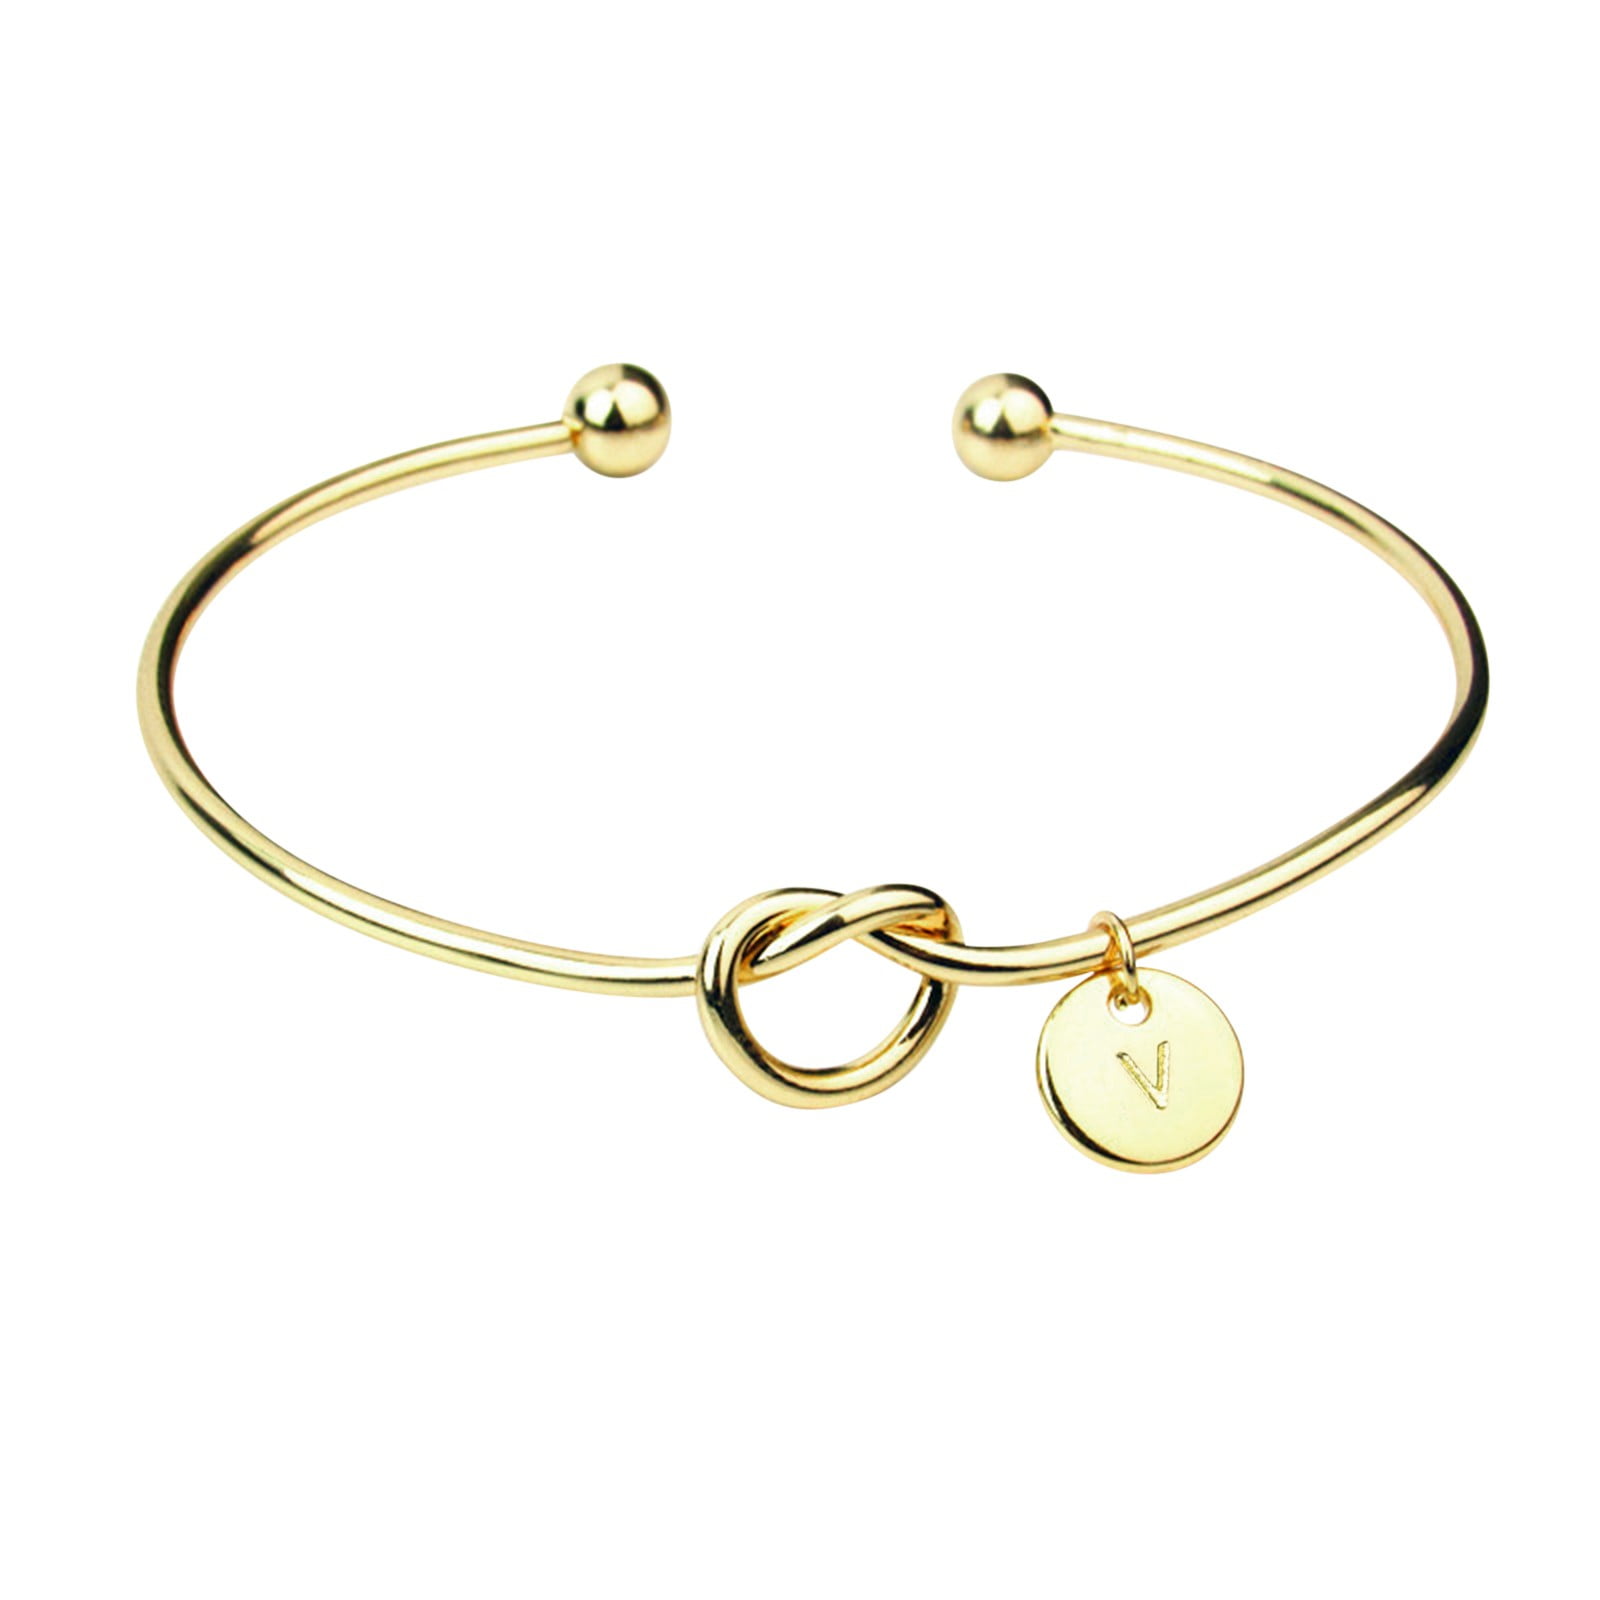 9ct gold shaped bangles in stock... - John Stewart Jewellers | Facebook